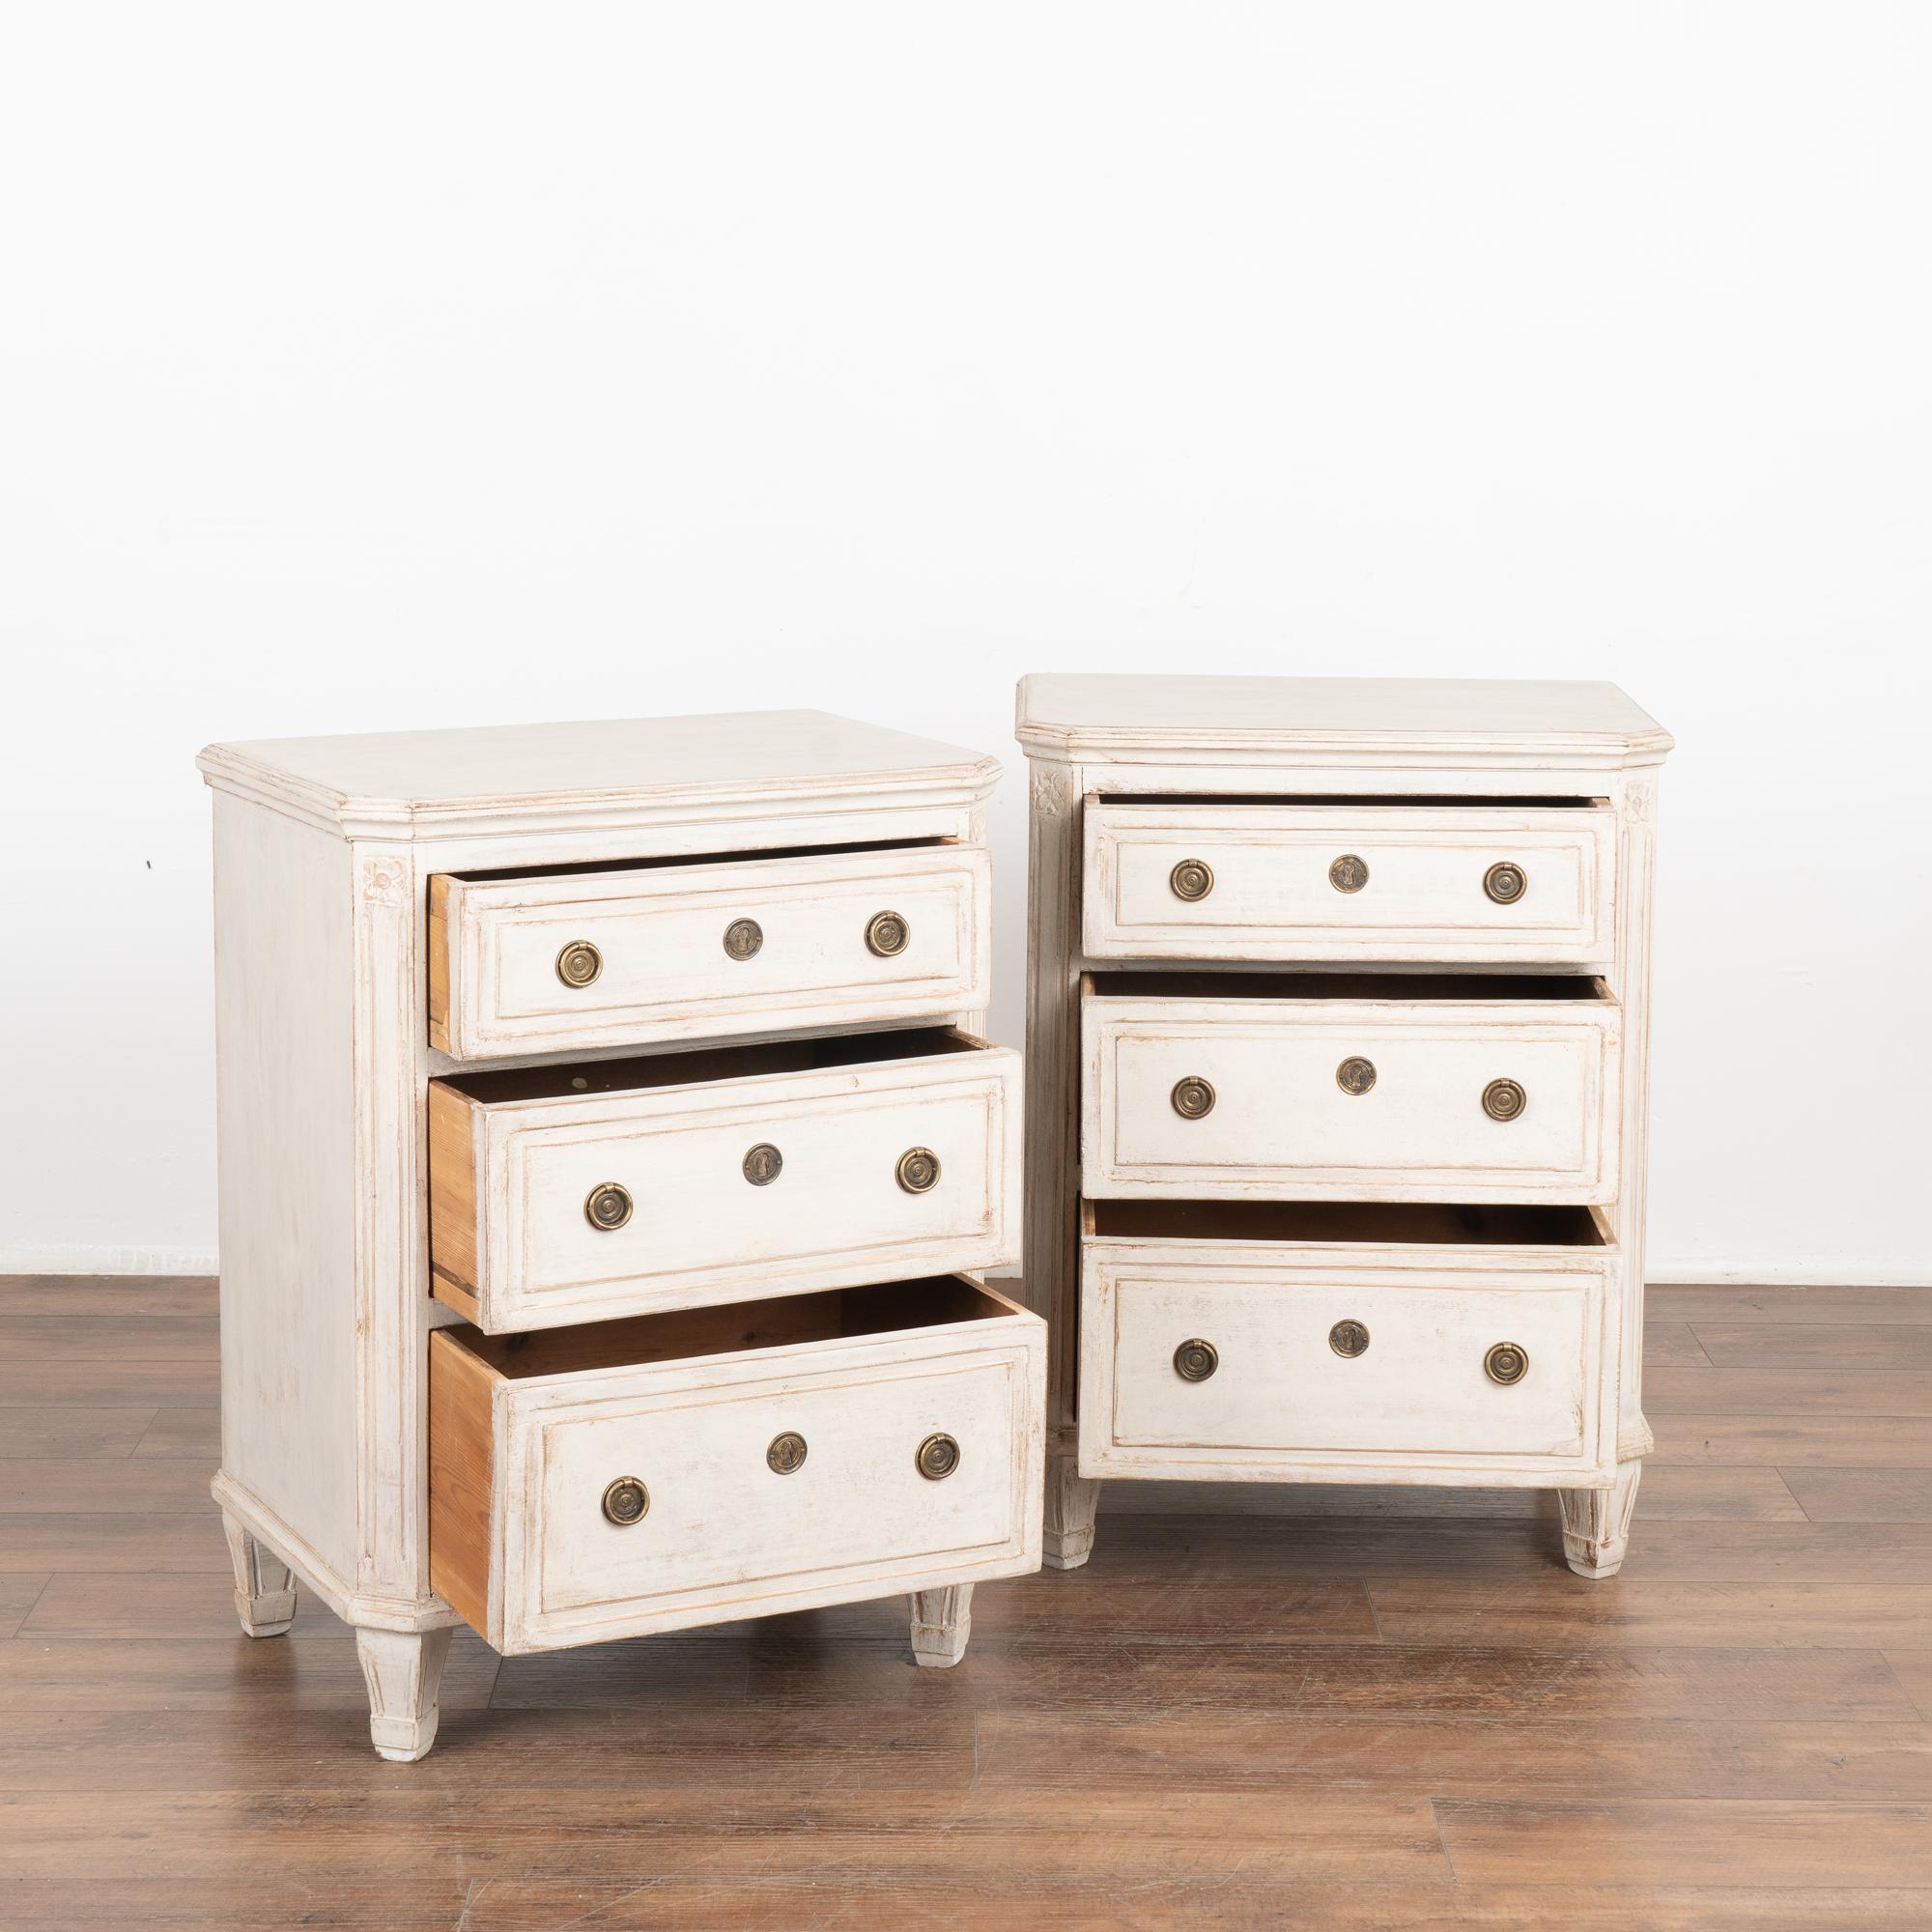 Gustavian Pair of Small White Chest of Drawers, Nightstands, Sweden circa 1860-80